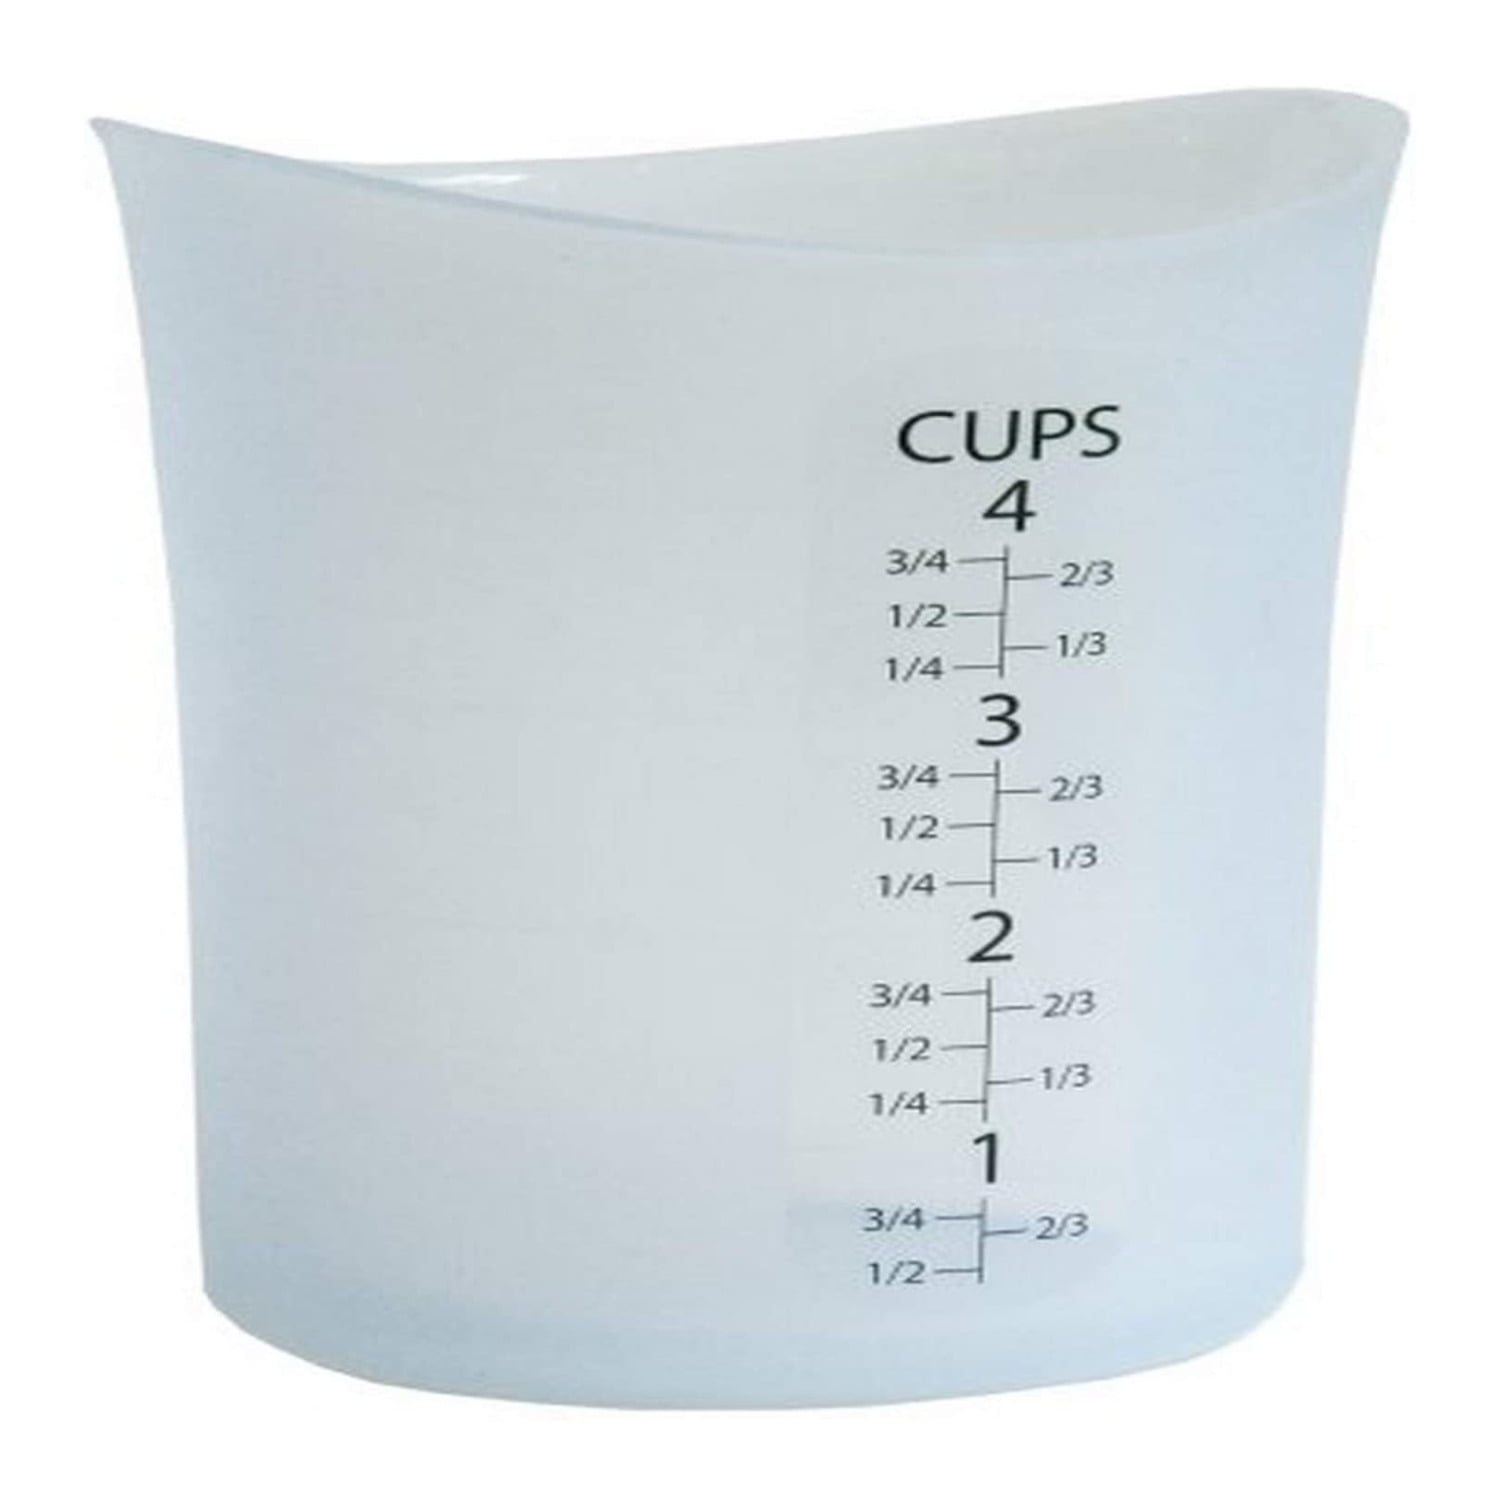  iSi Flex~it Silicone 2 Ounce Mini Measuring Cup: Home & Kitchen